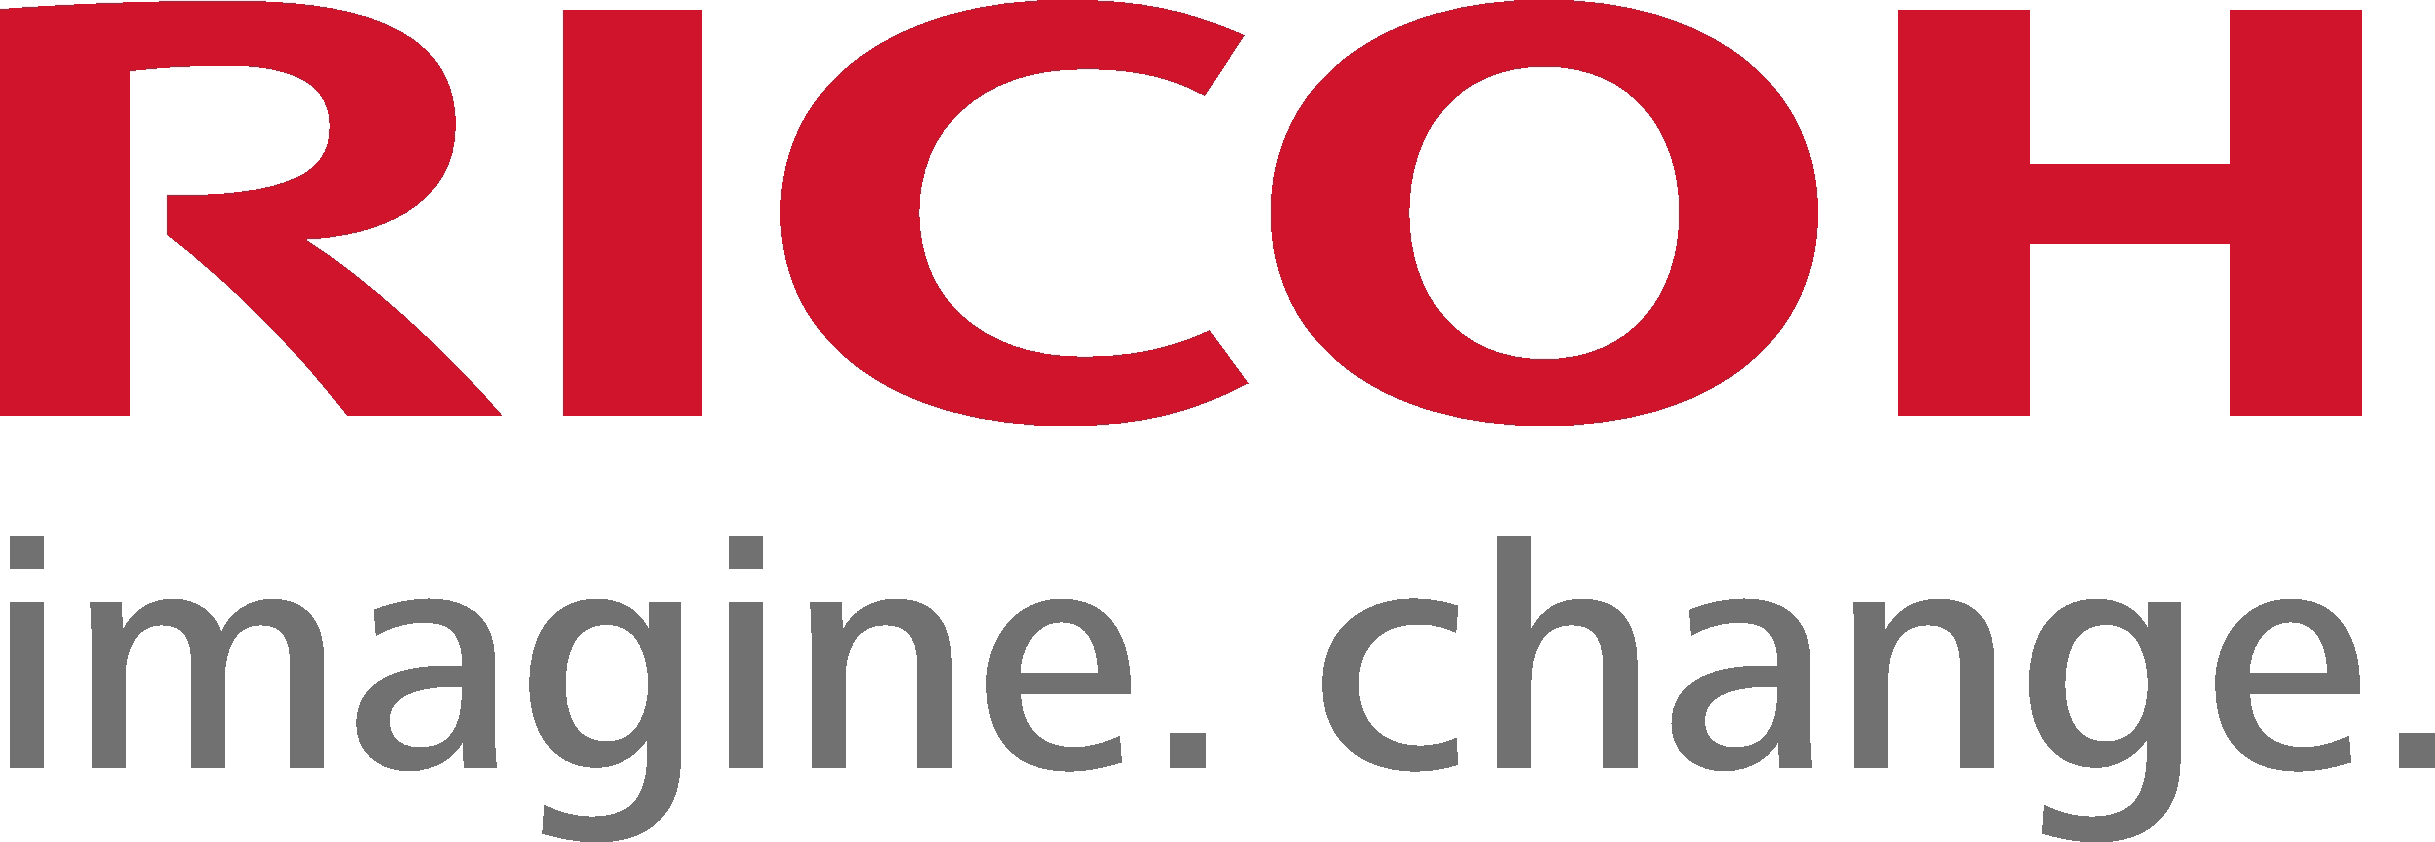 Ricoh-with-Tagline.png